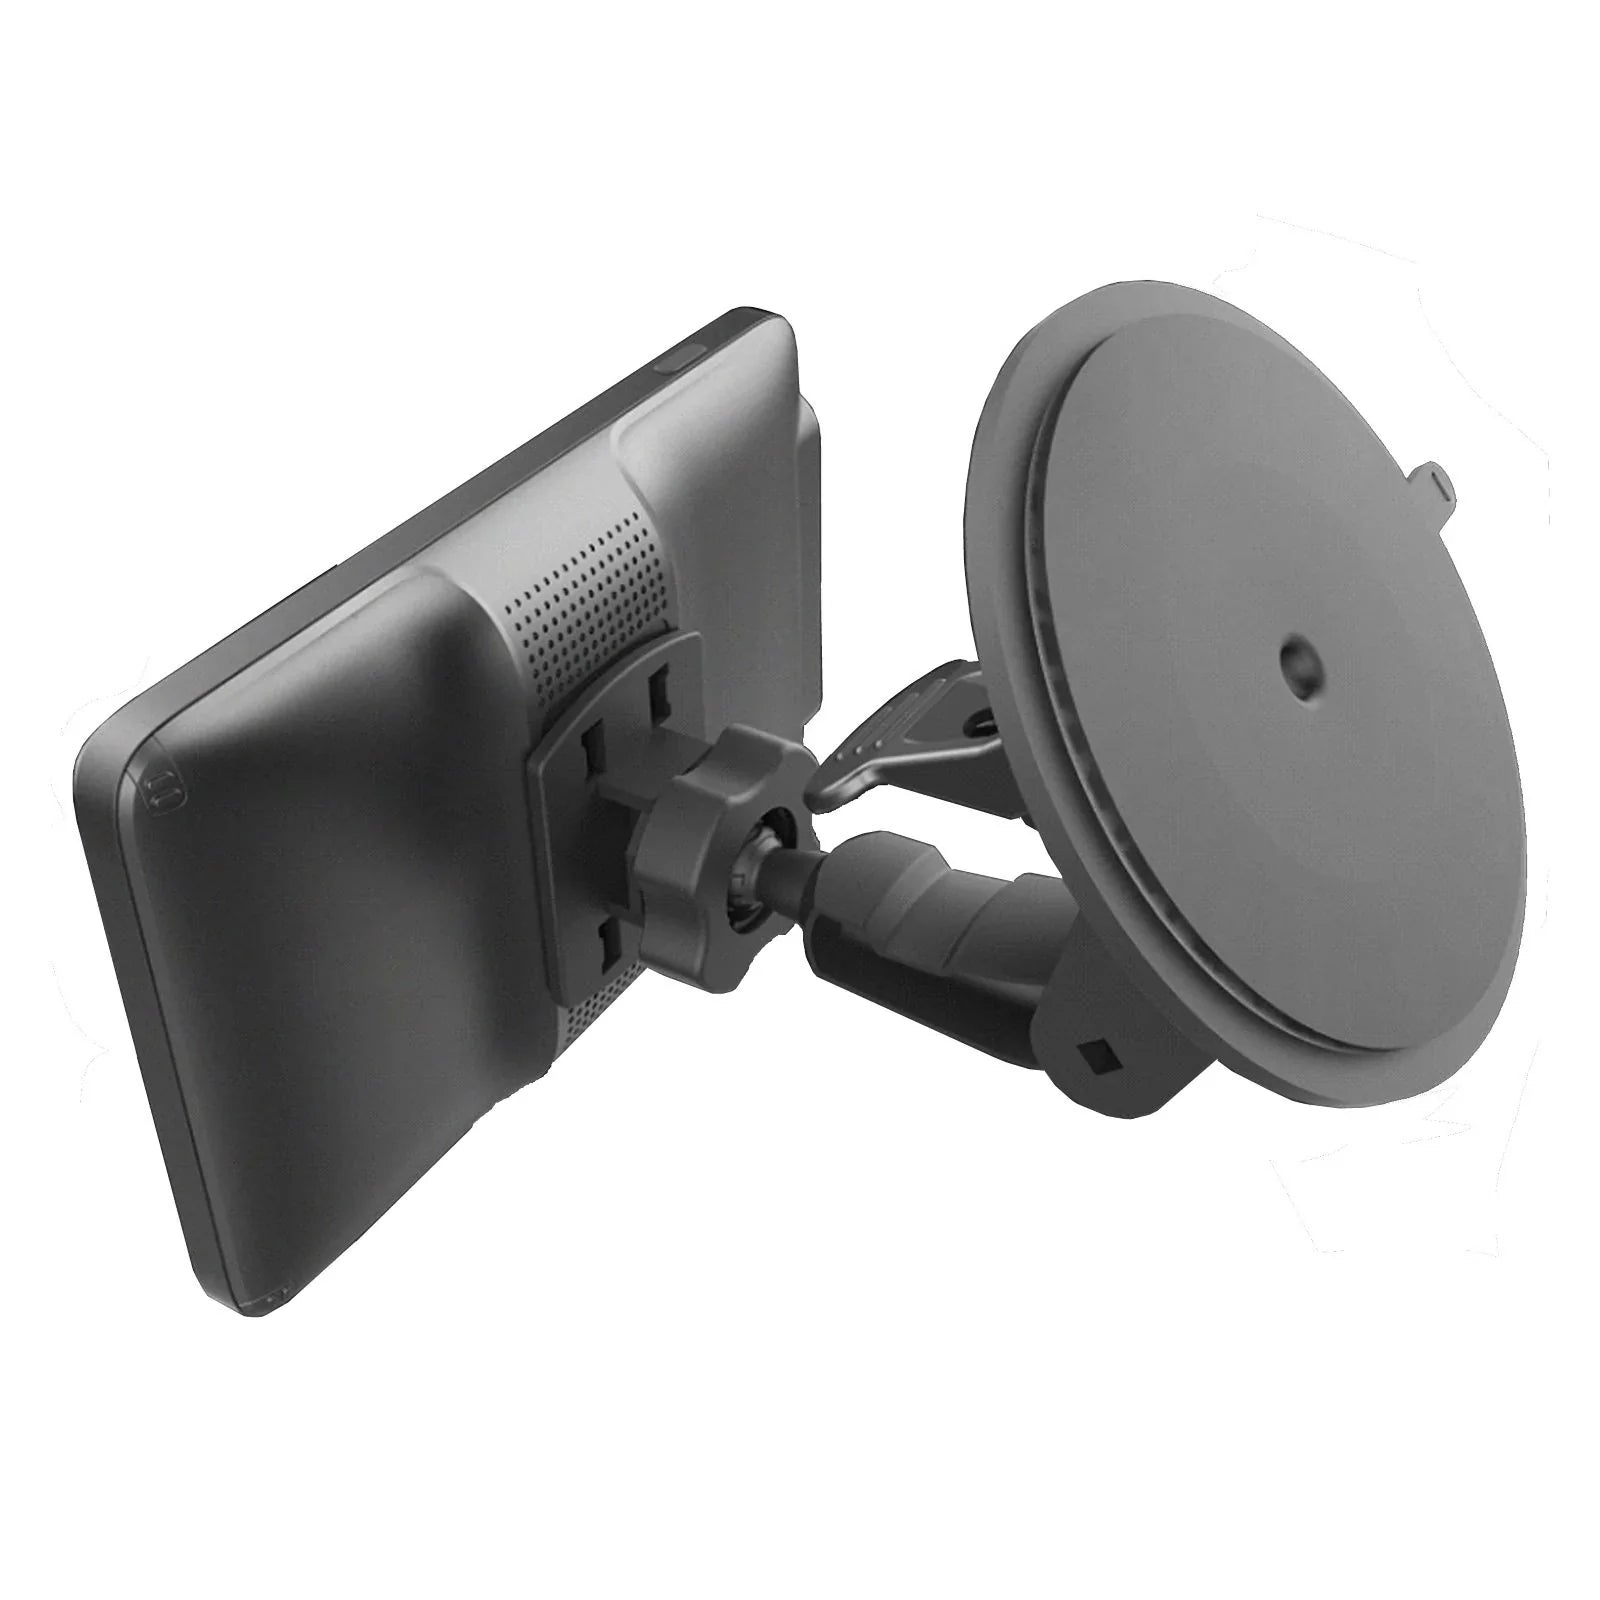 Truckmate-Plus S6900 with active magnetic mount